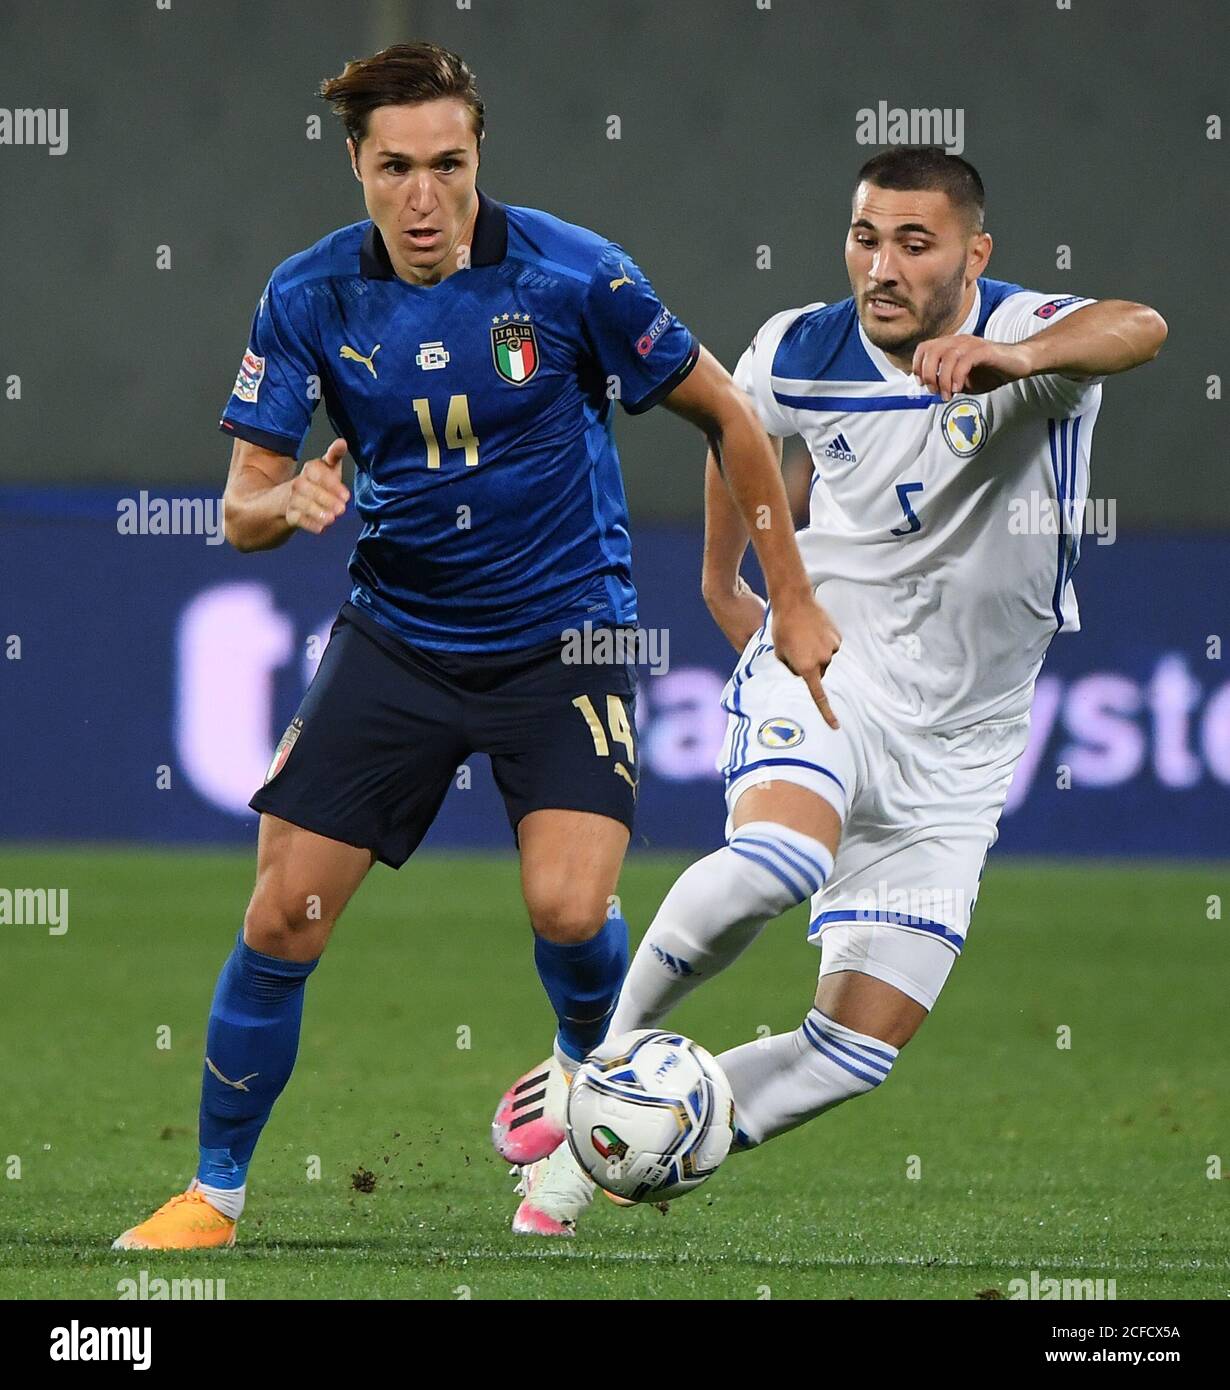 Florence. 5th Sep, 2020. Italy's Federico Chiesa (L) vies with Bosnia and Herzegovina's Sead Kolasinac during a UEFA Nations League match between Italy and Bosnia and Herzegovina in Florence, Italy, Sept. 4, 2020. Credit: Xinhua/Alamy Live News Stock Photo